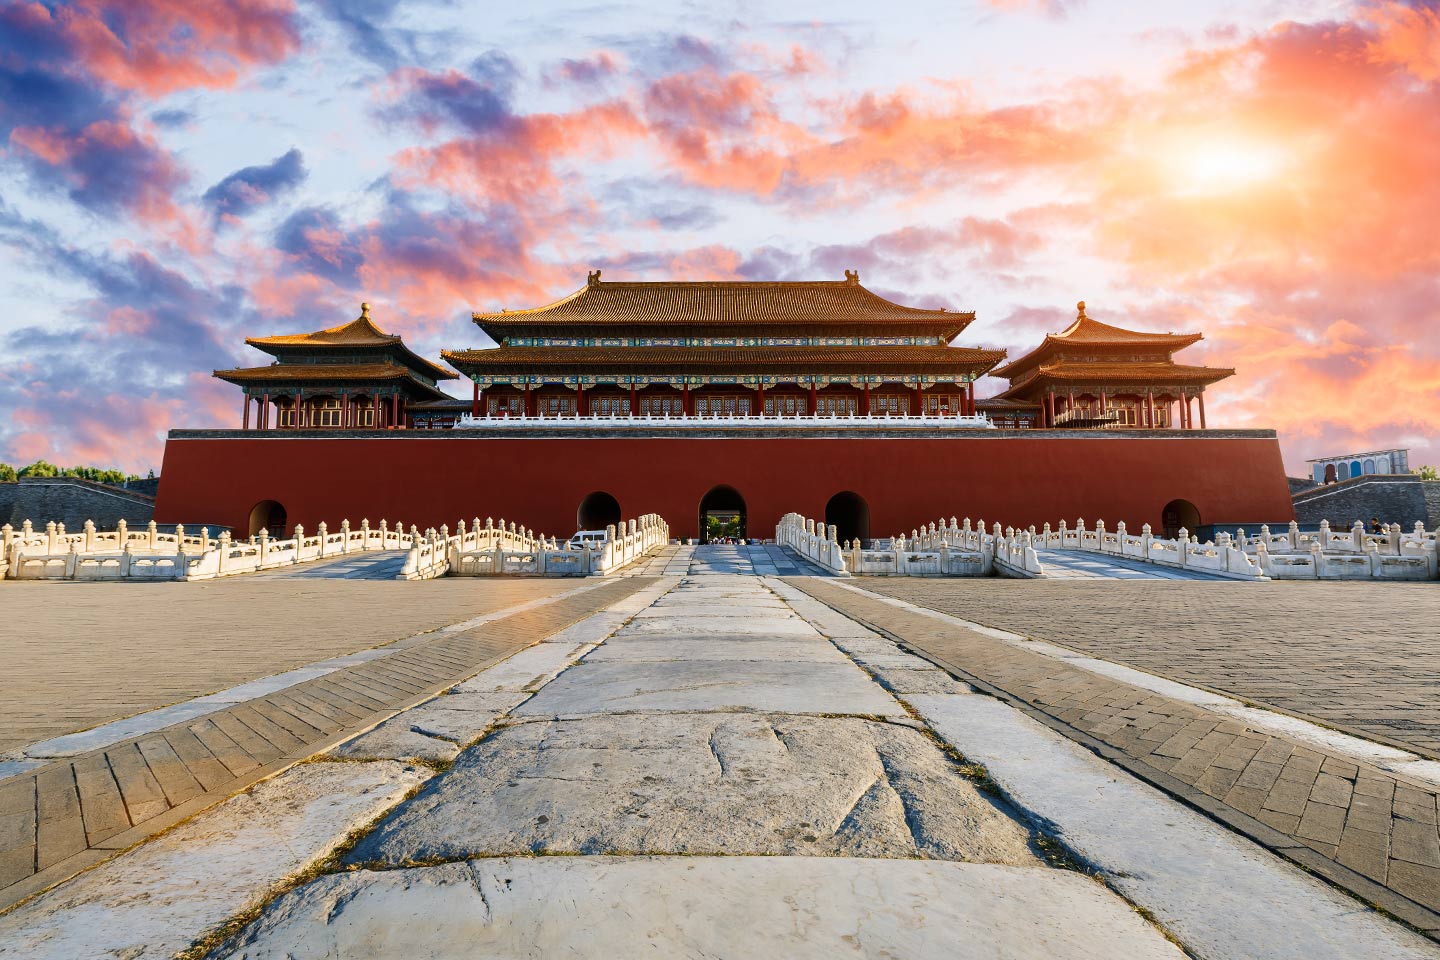 Ancient royal palaces of the Forbidden City in Beijing, China